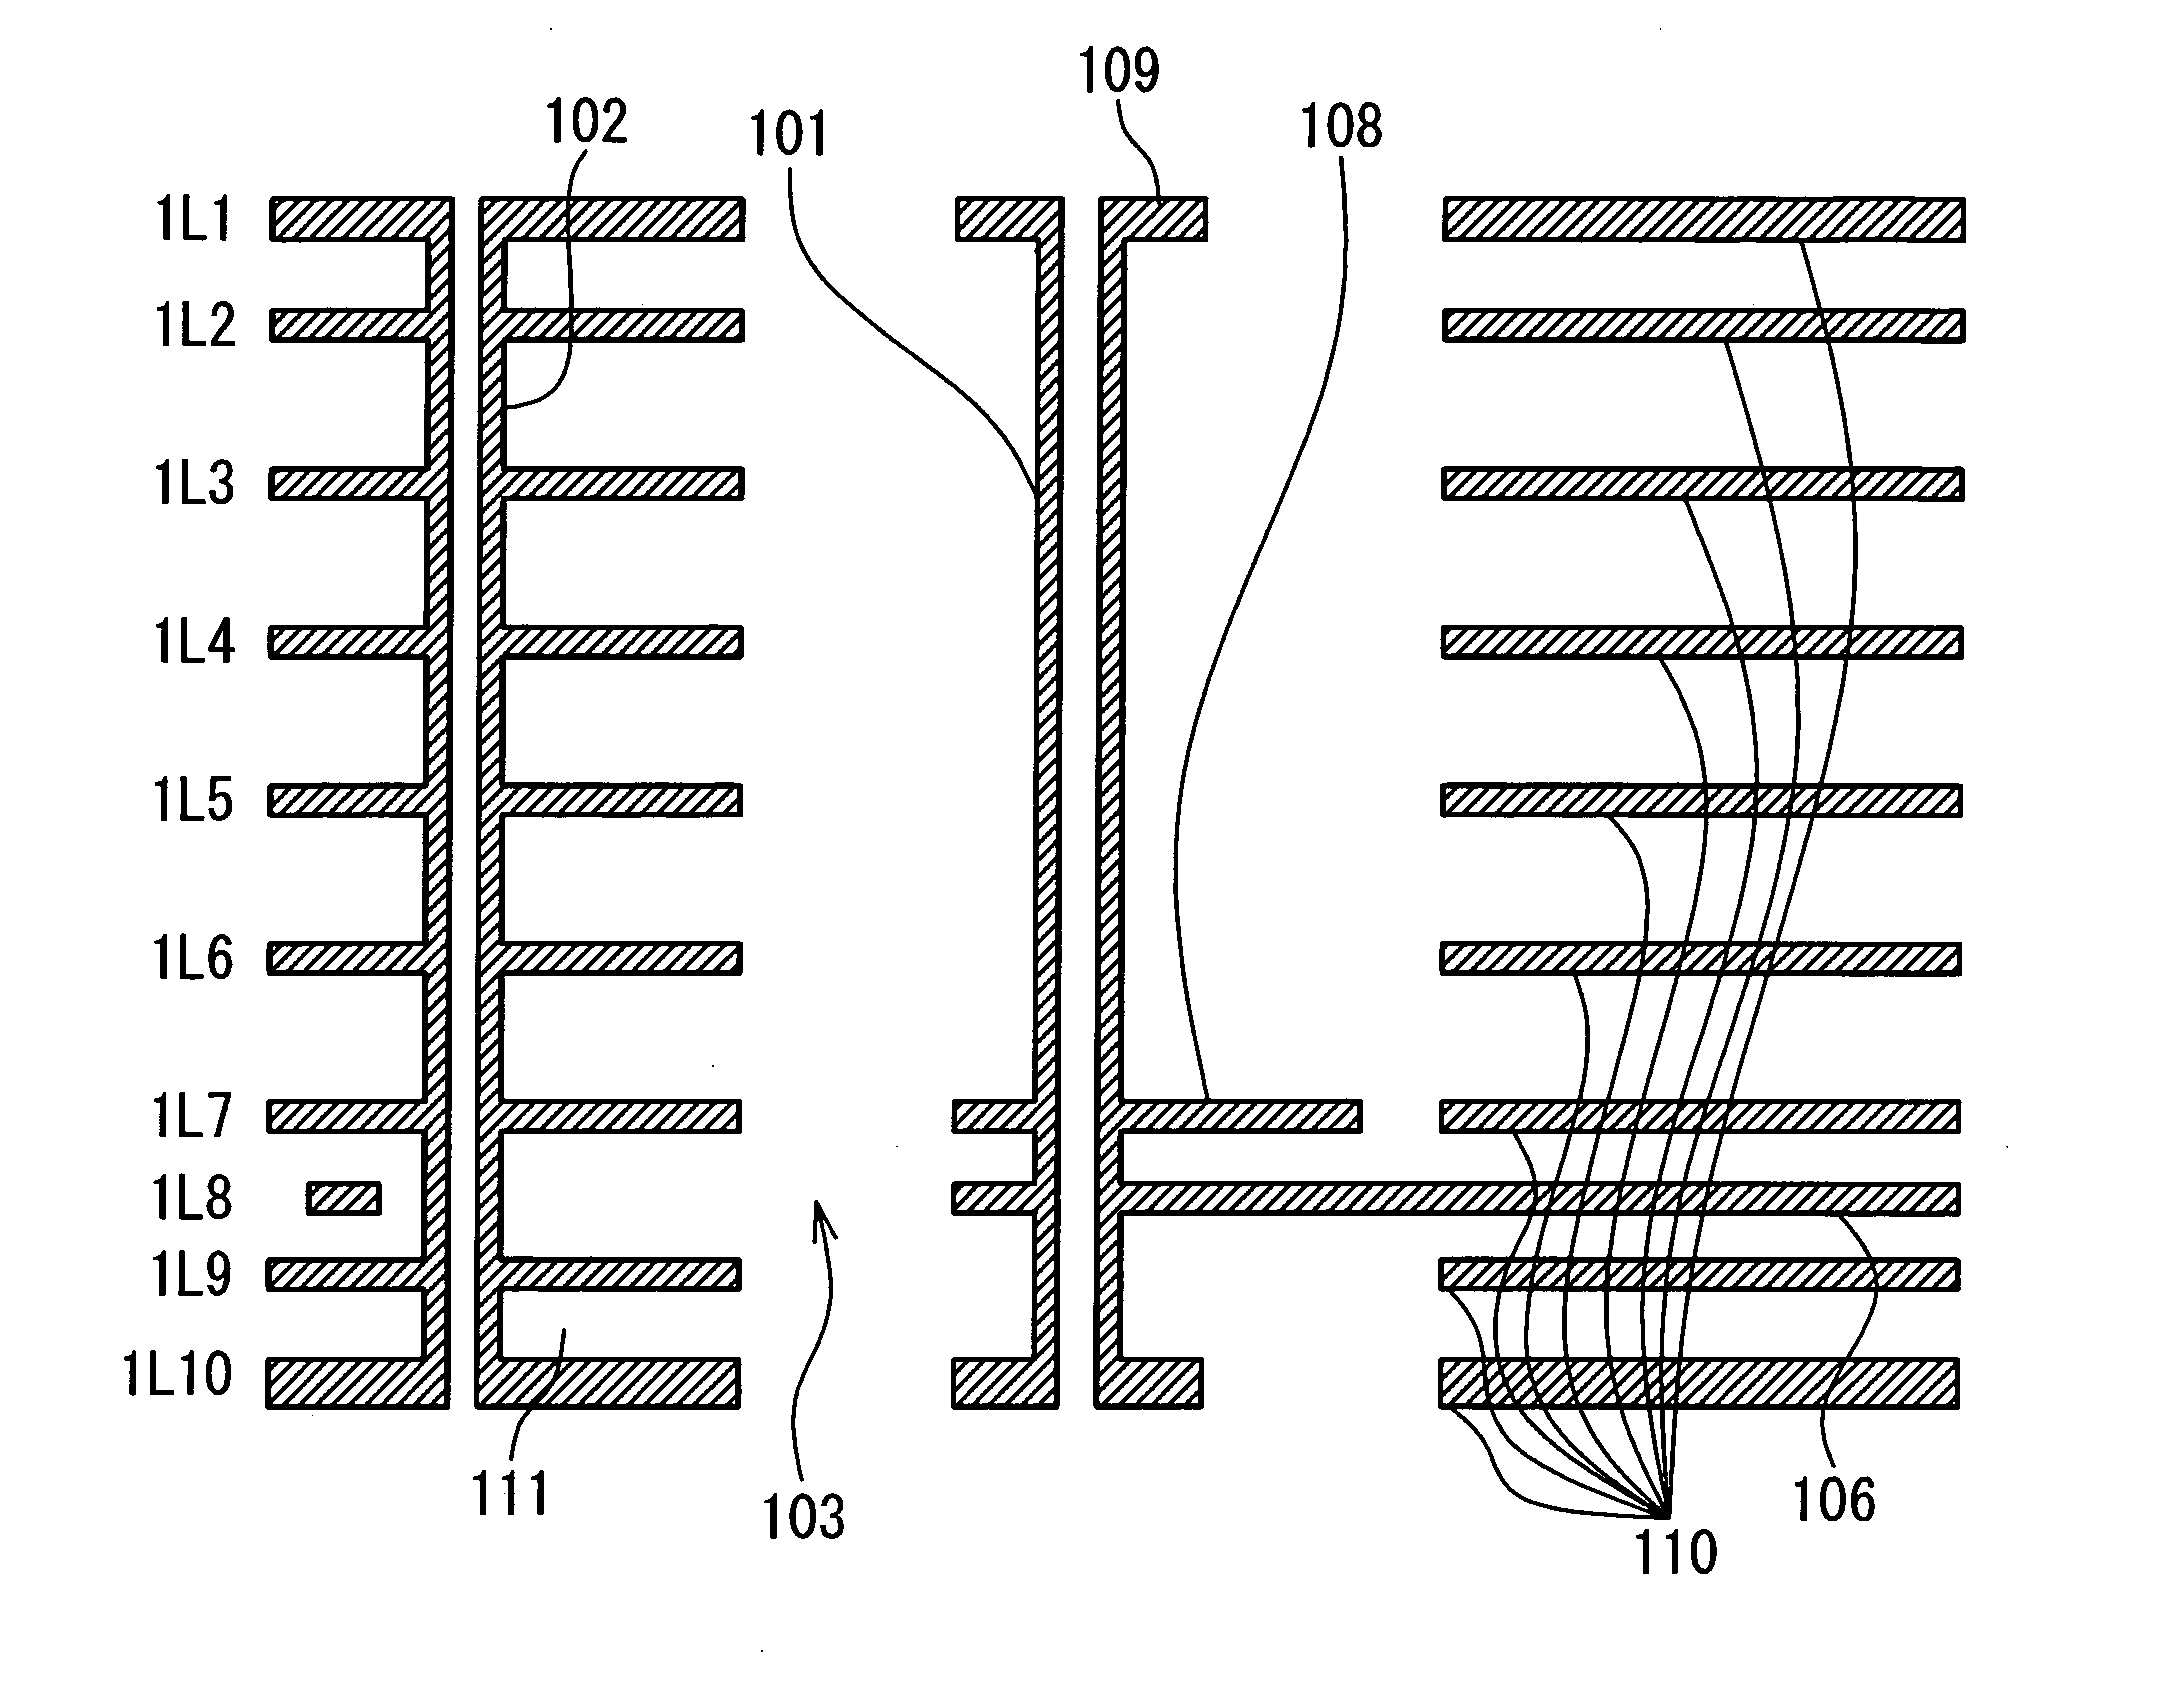 Multi-layer substrate